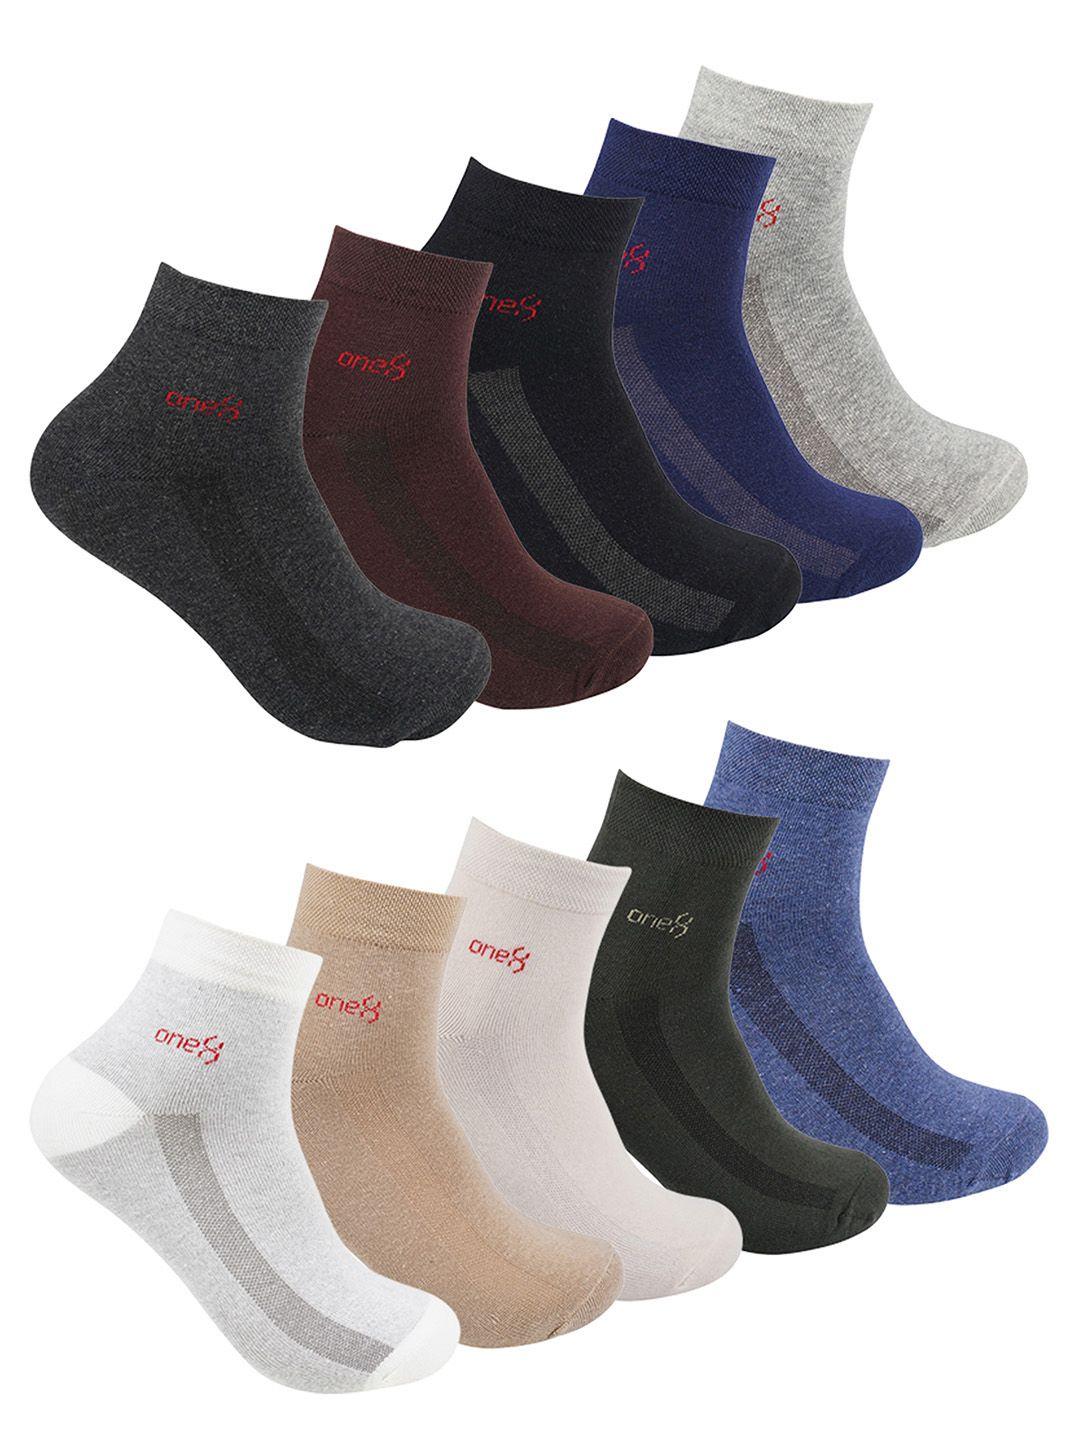 one8 men pack of 10 patterned cotton anti-microbial ankle-length socks